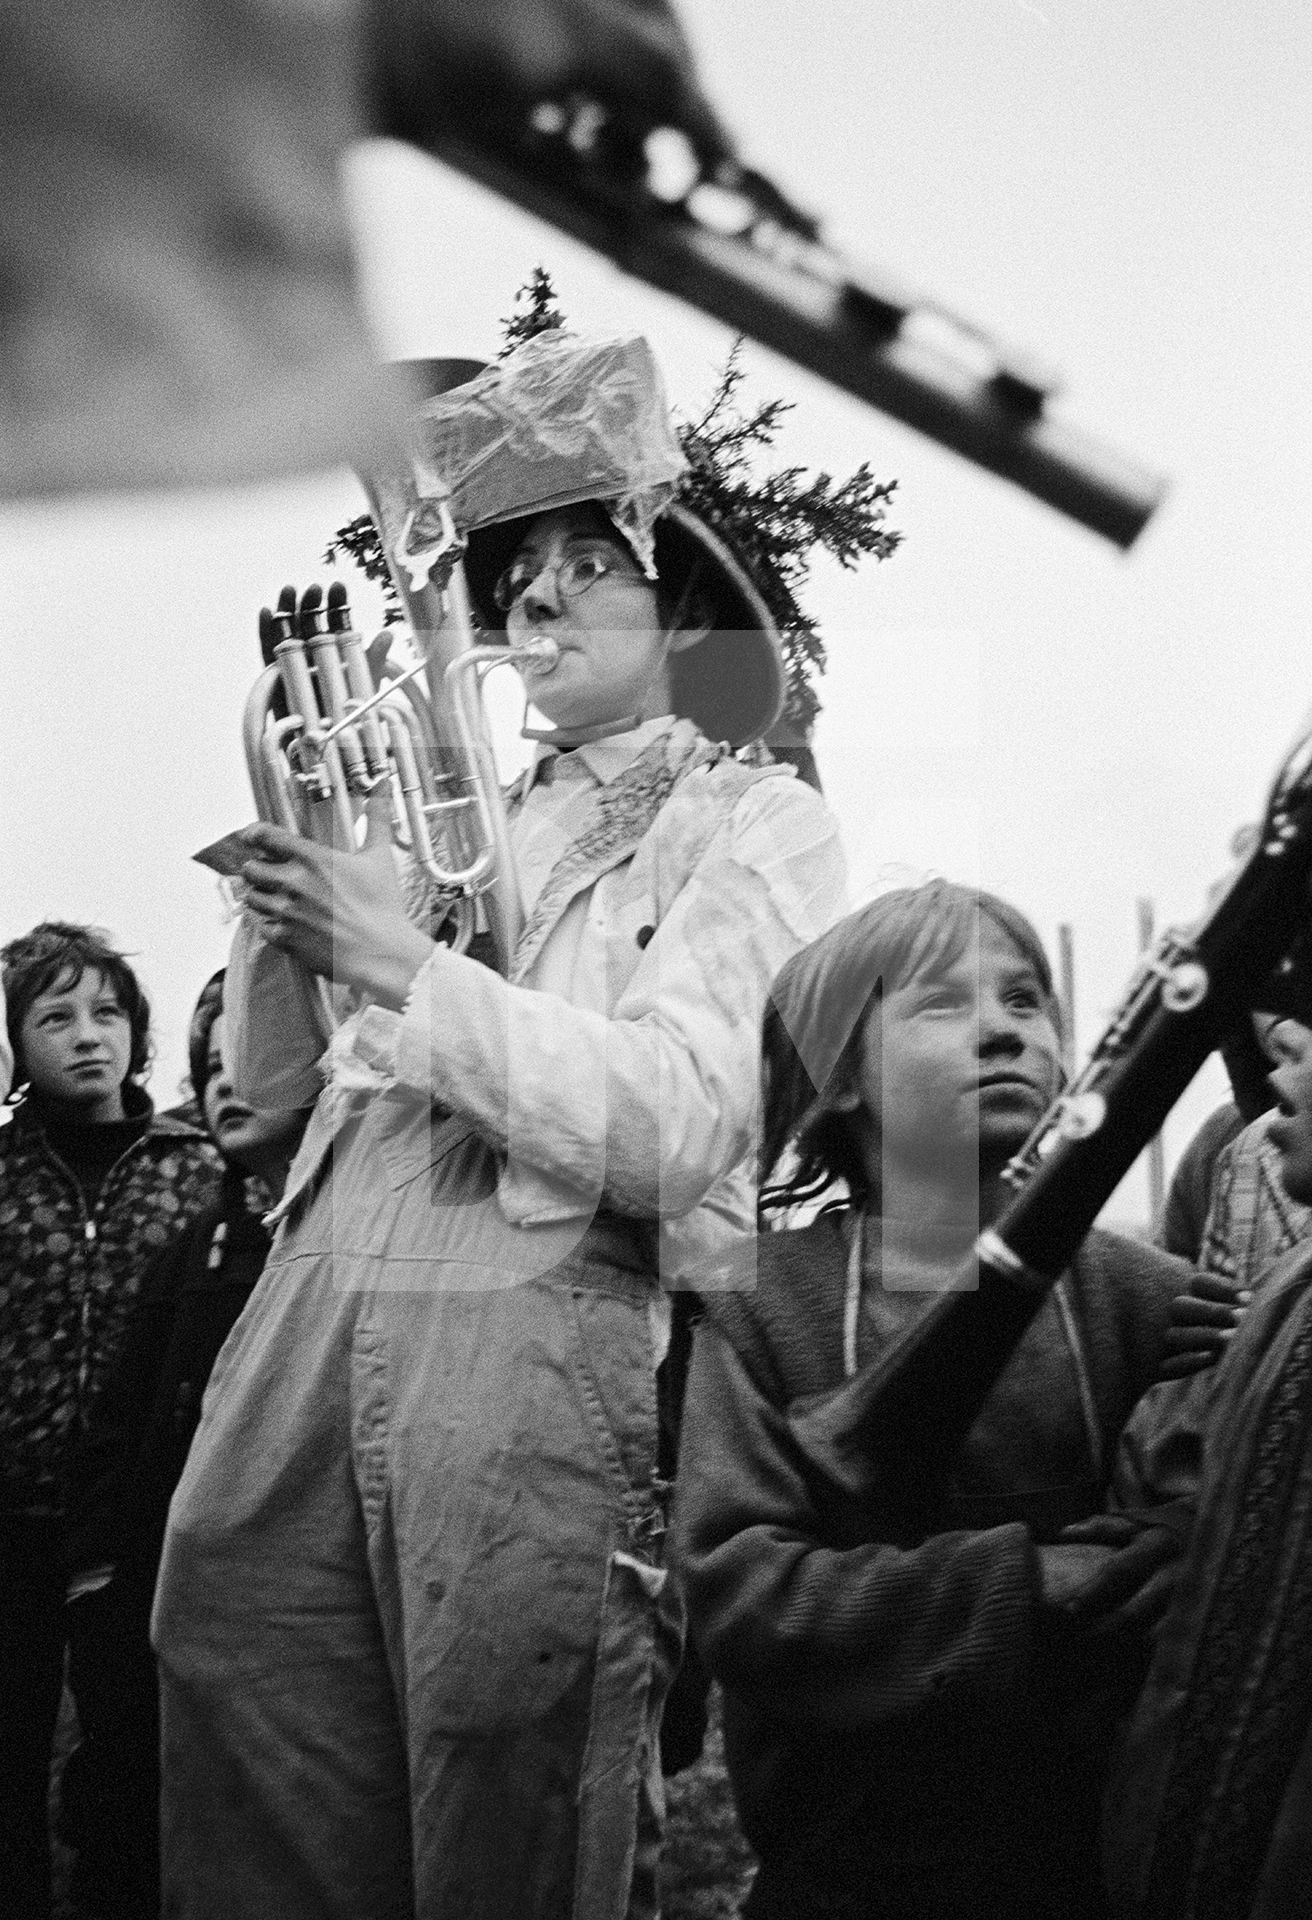 Mayday celebration, Burnley and Barrowford along the Leeds-Liverpool canal. 1 May 1976 by Daniel Meadows